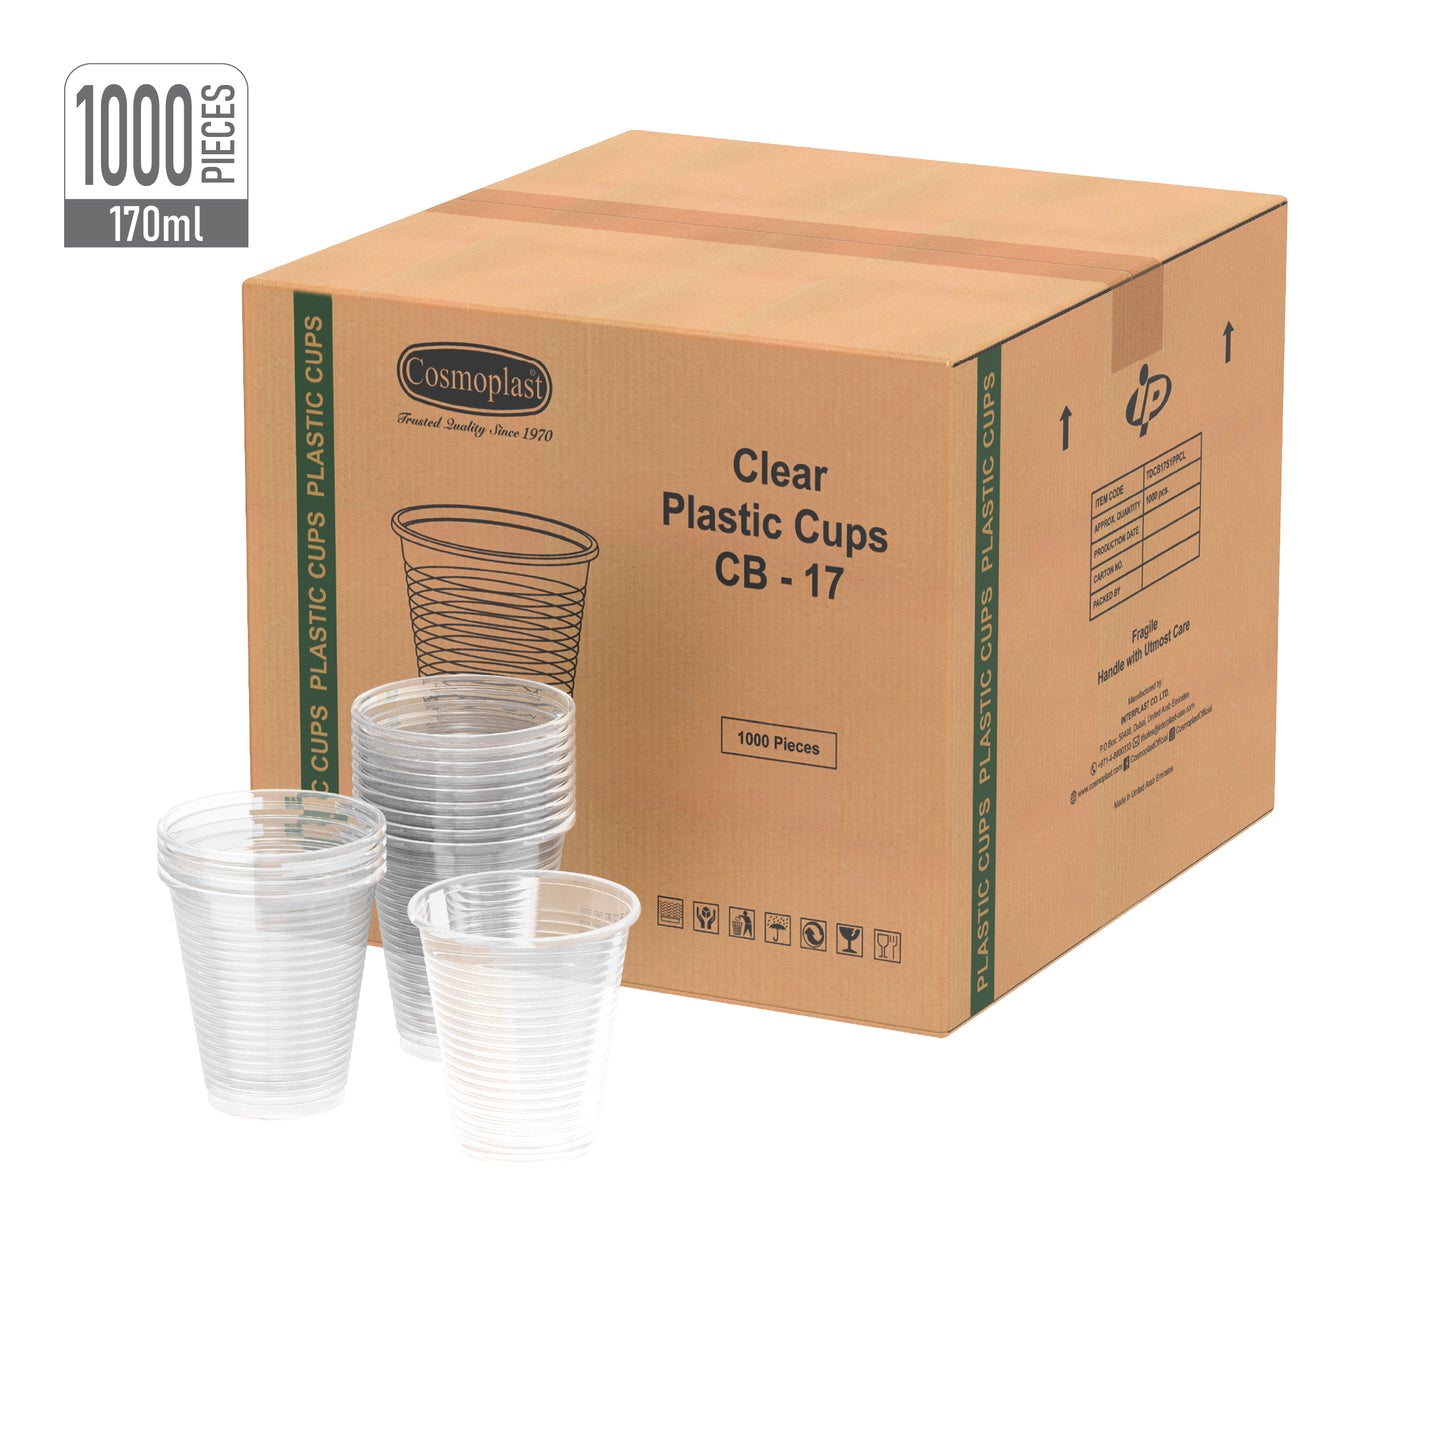 170 ml Clear Plastic Cups Carton of 1000